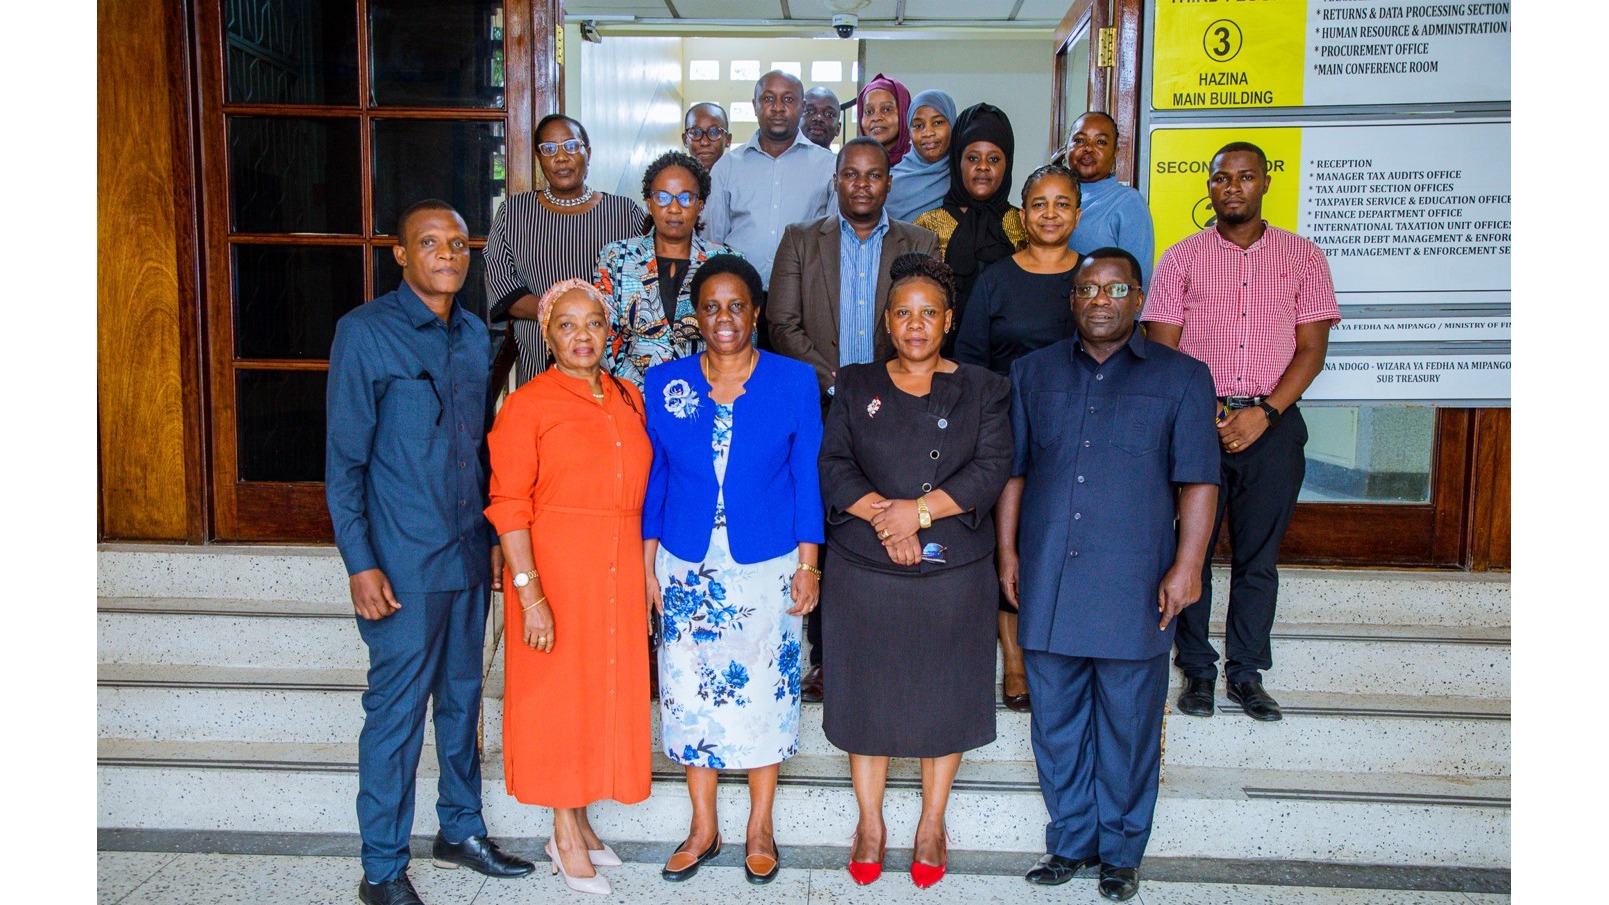 Deputy Permanent Secretary of the Ministry of Finance, Ms. Jenifa Christian Omolo met and held a meeting with the members and staff of the Tribunal